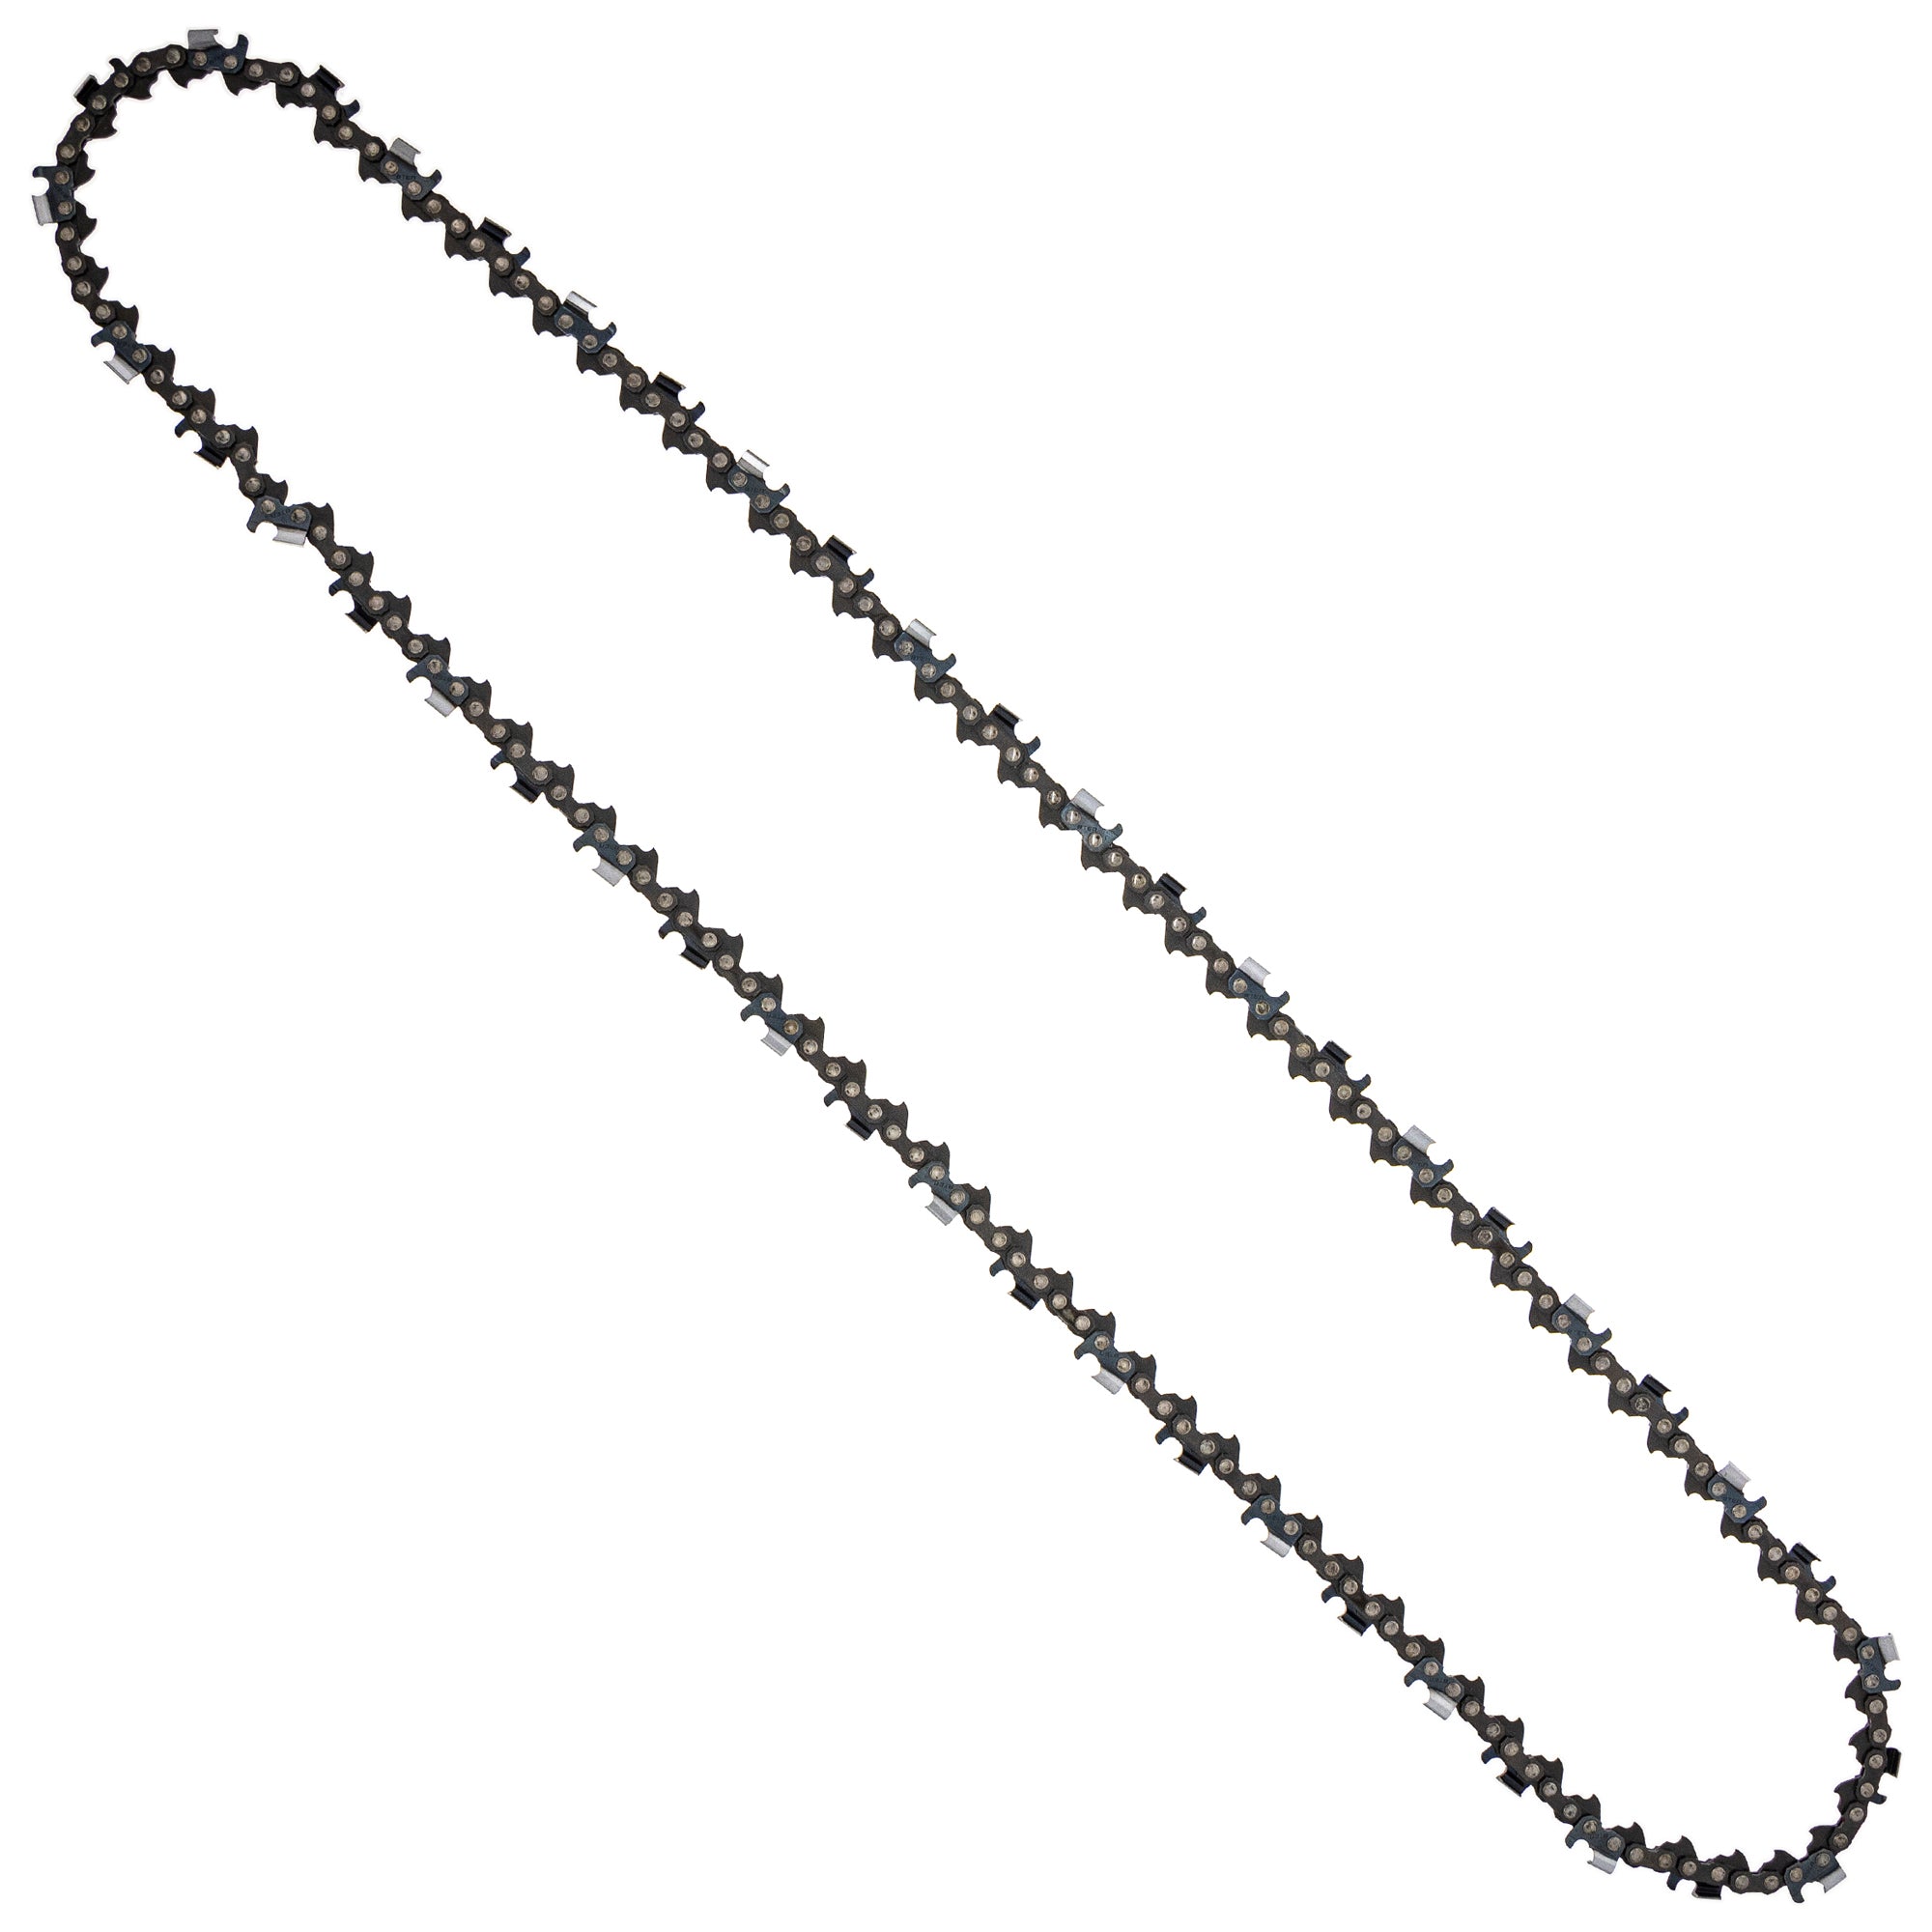 8TEN 810-CCC2212H Chain 5-Pack for zOTHER Oregon MS 066 064 056